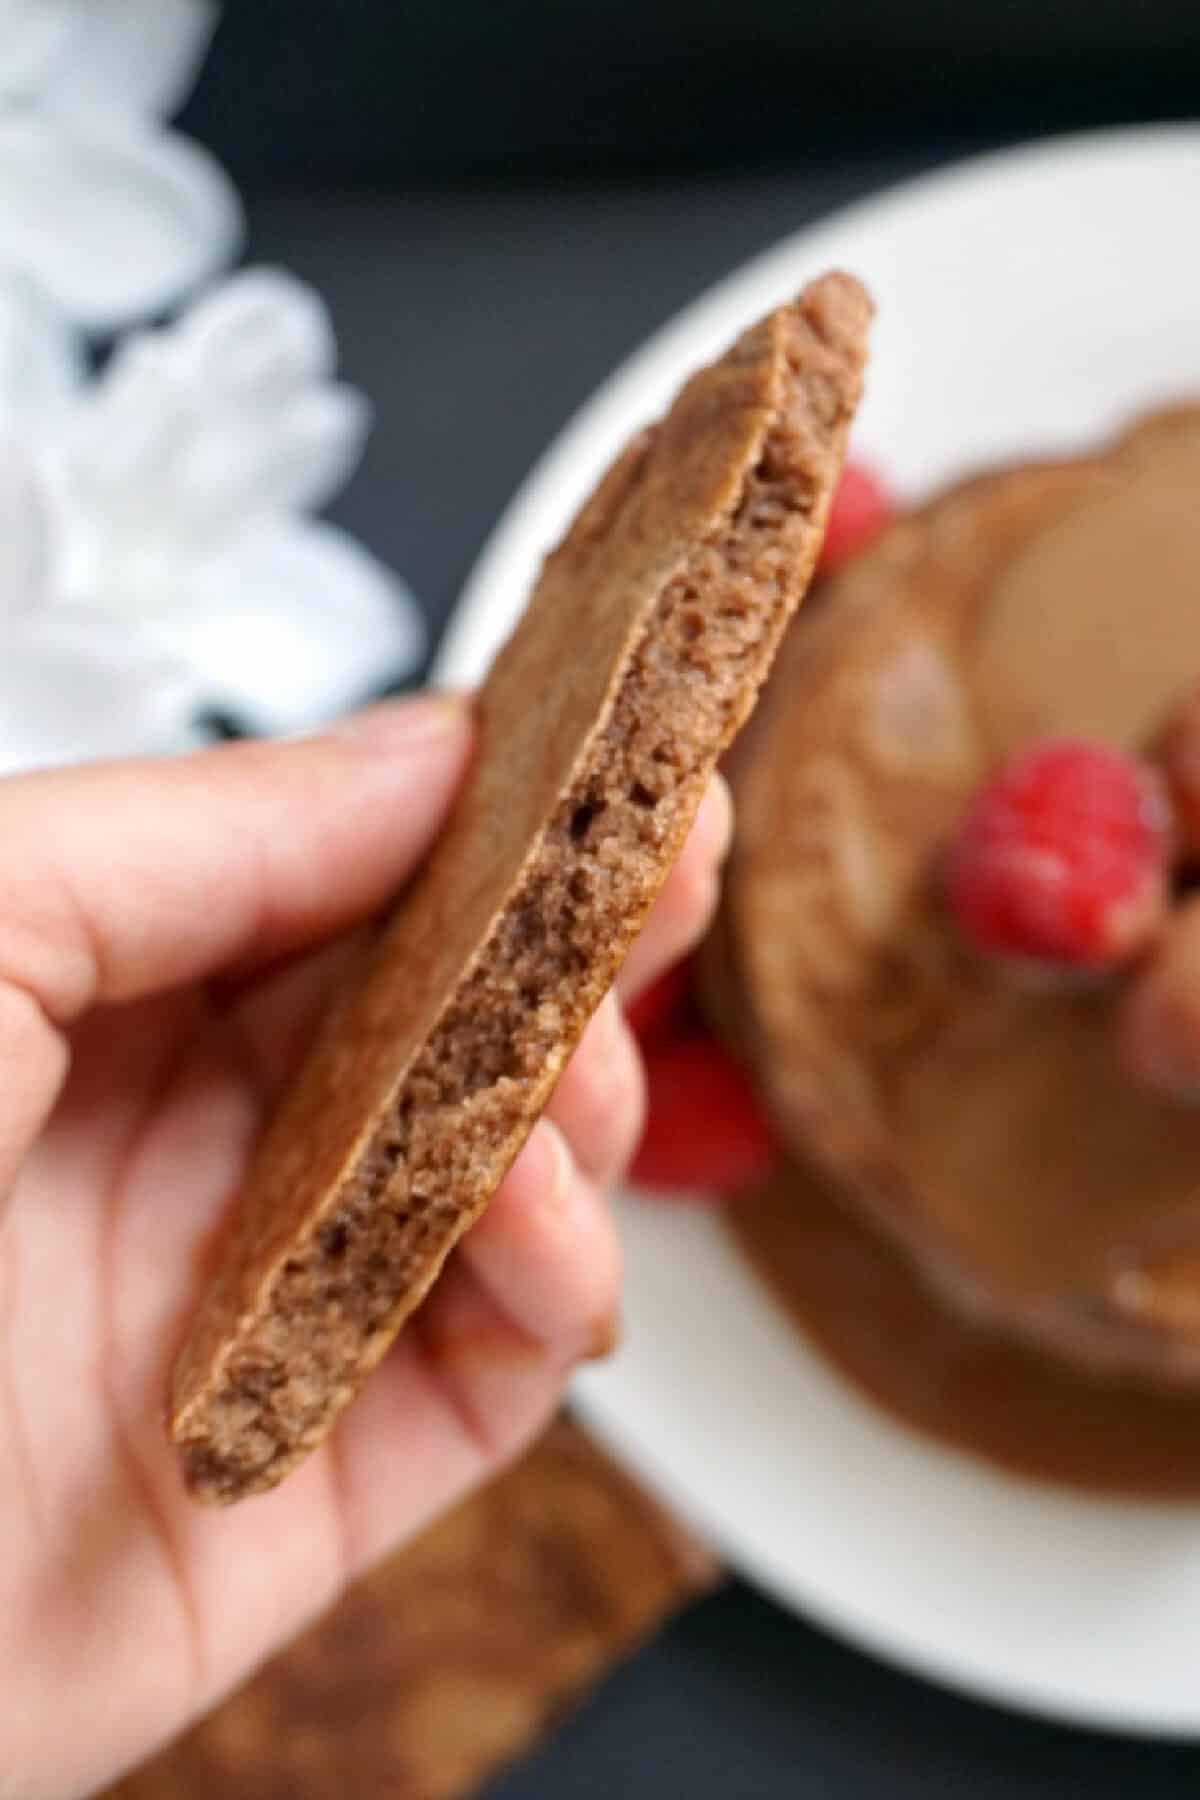 A half a chocolate pancake being held by hand with more pancakes in the background.